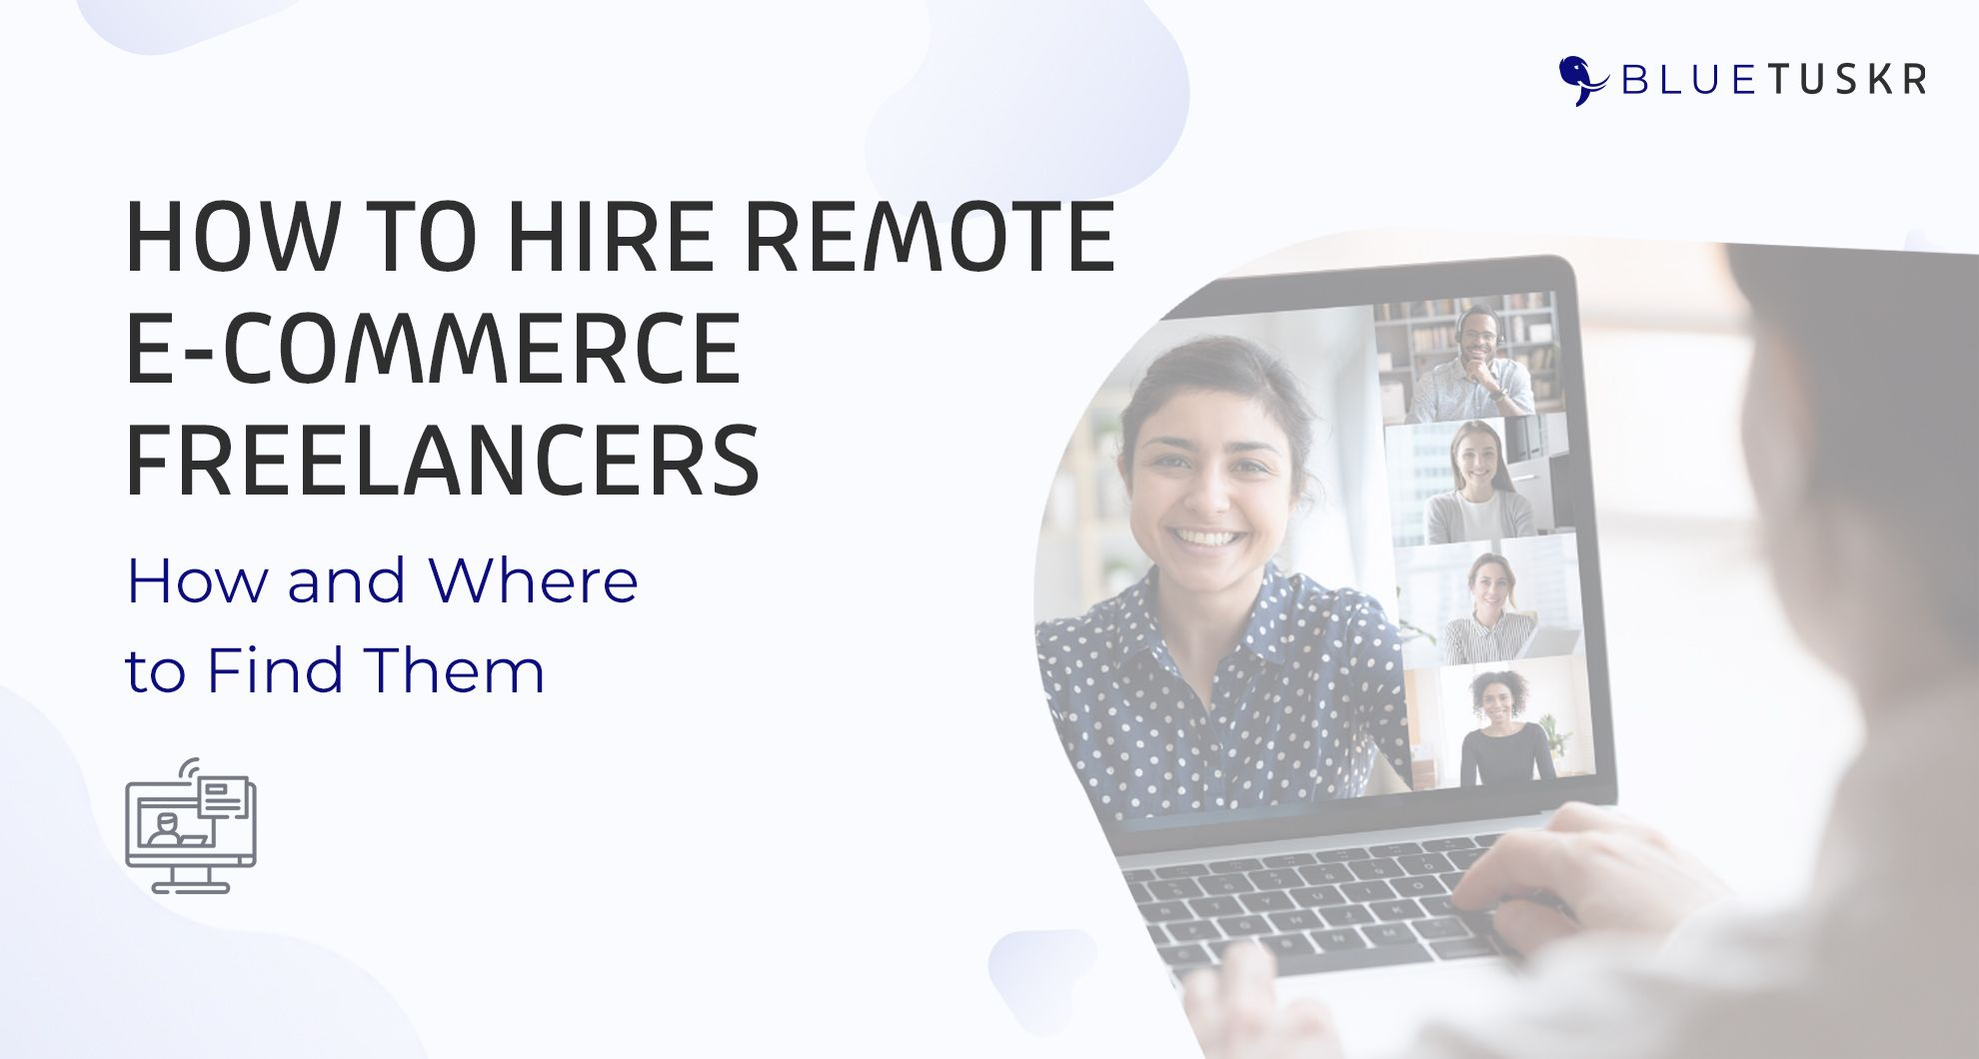 How to Hire Remote E-commerce Freelancers and Where to Find Them